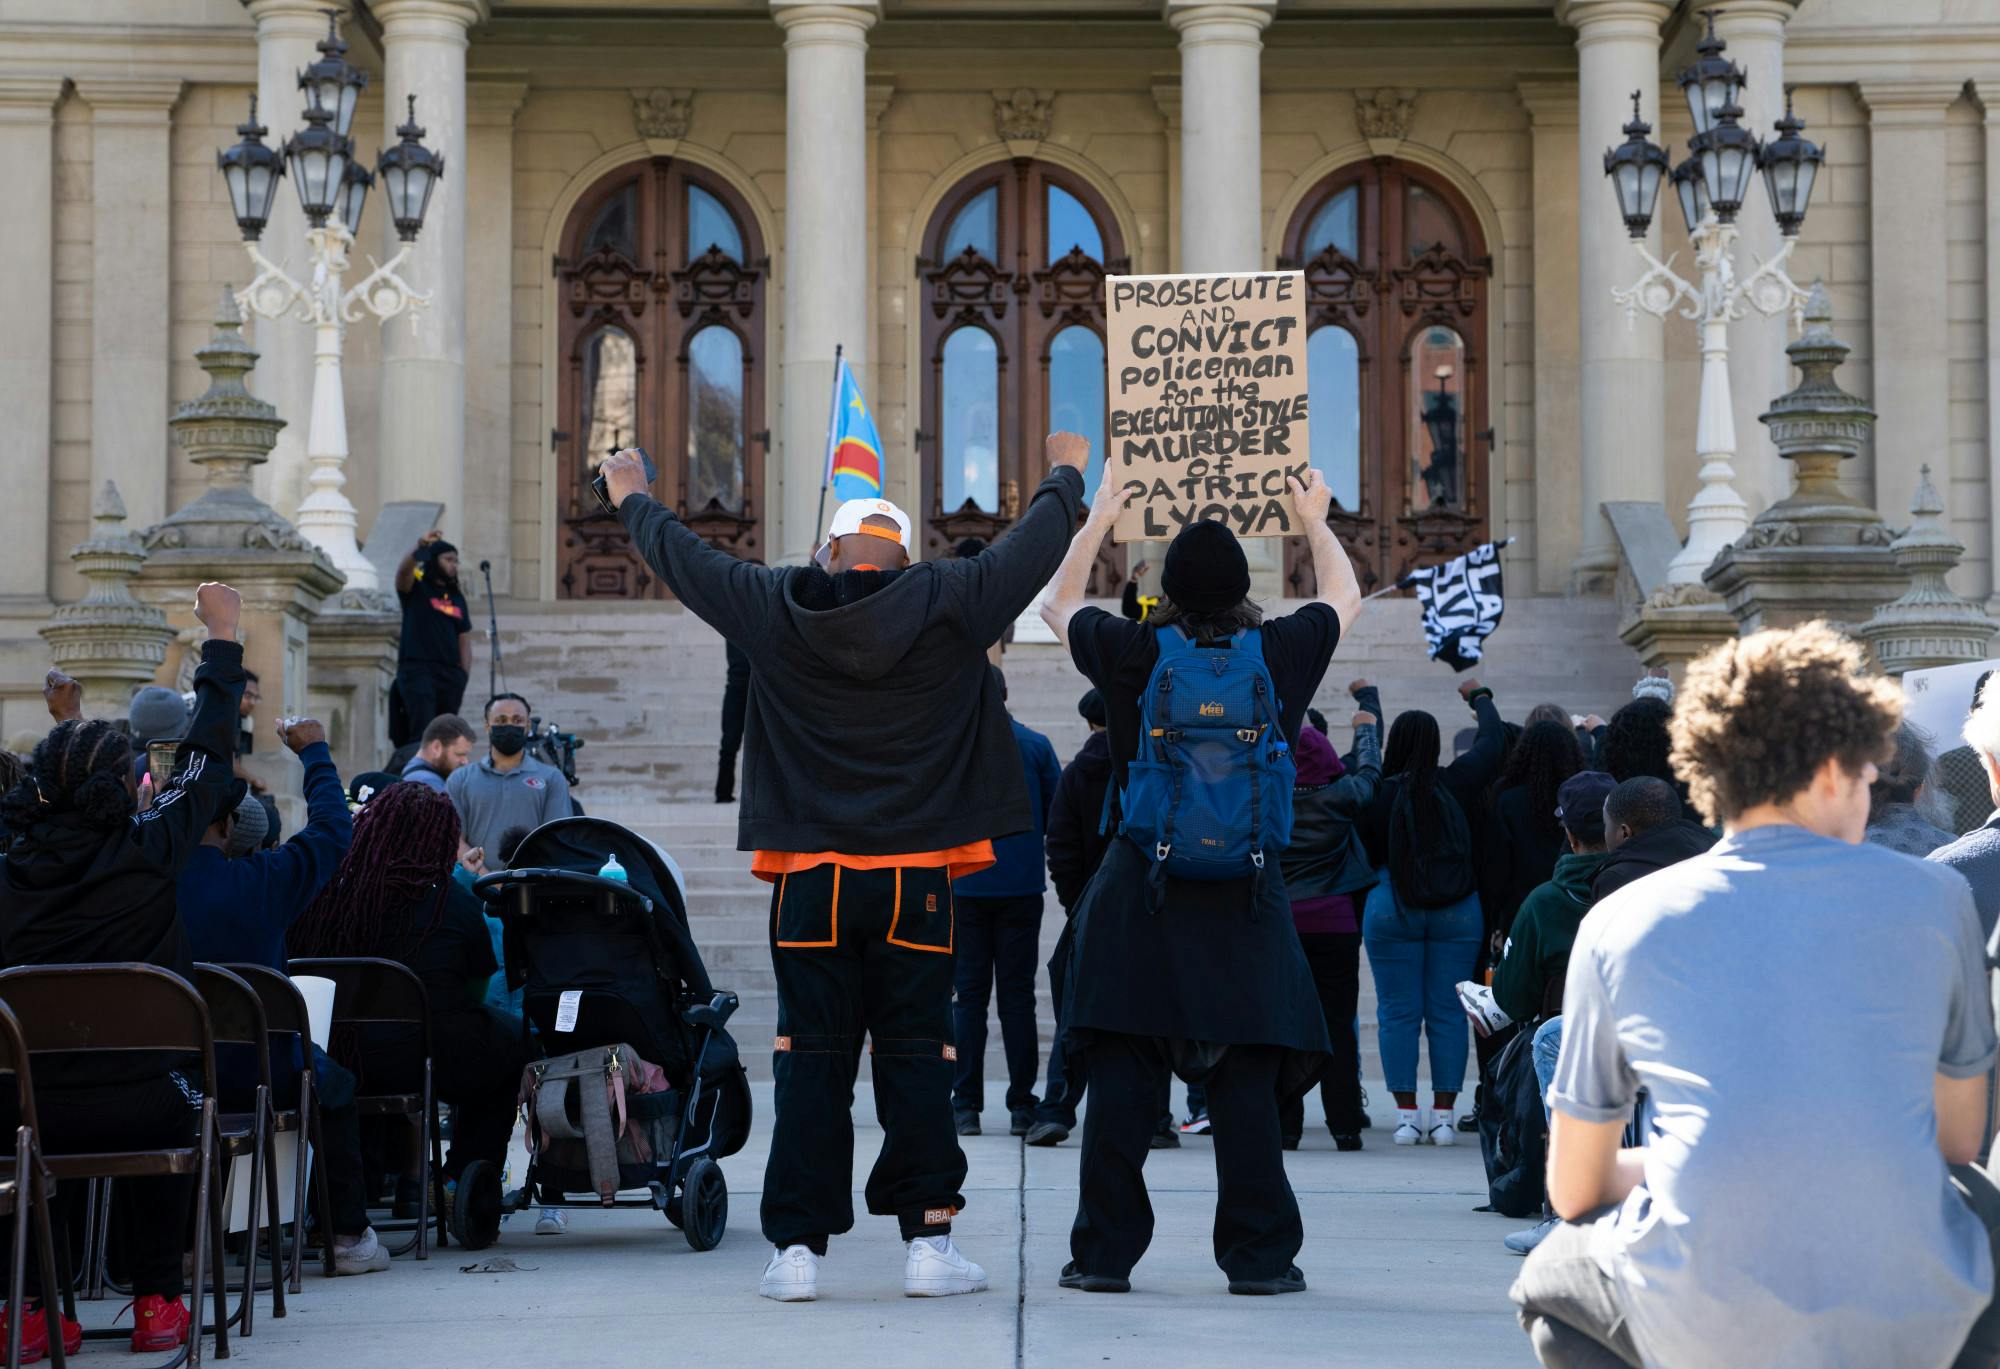 Black Lives Matter protesters gather at the capitol building on April 21, 2022, following the fatal shooting of Patrick Lyoya in Grand Rapids, Michigan.